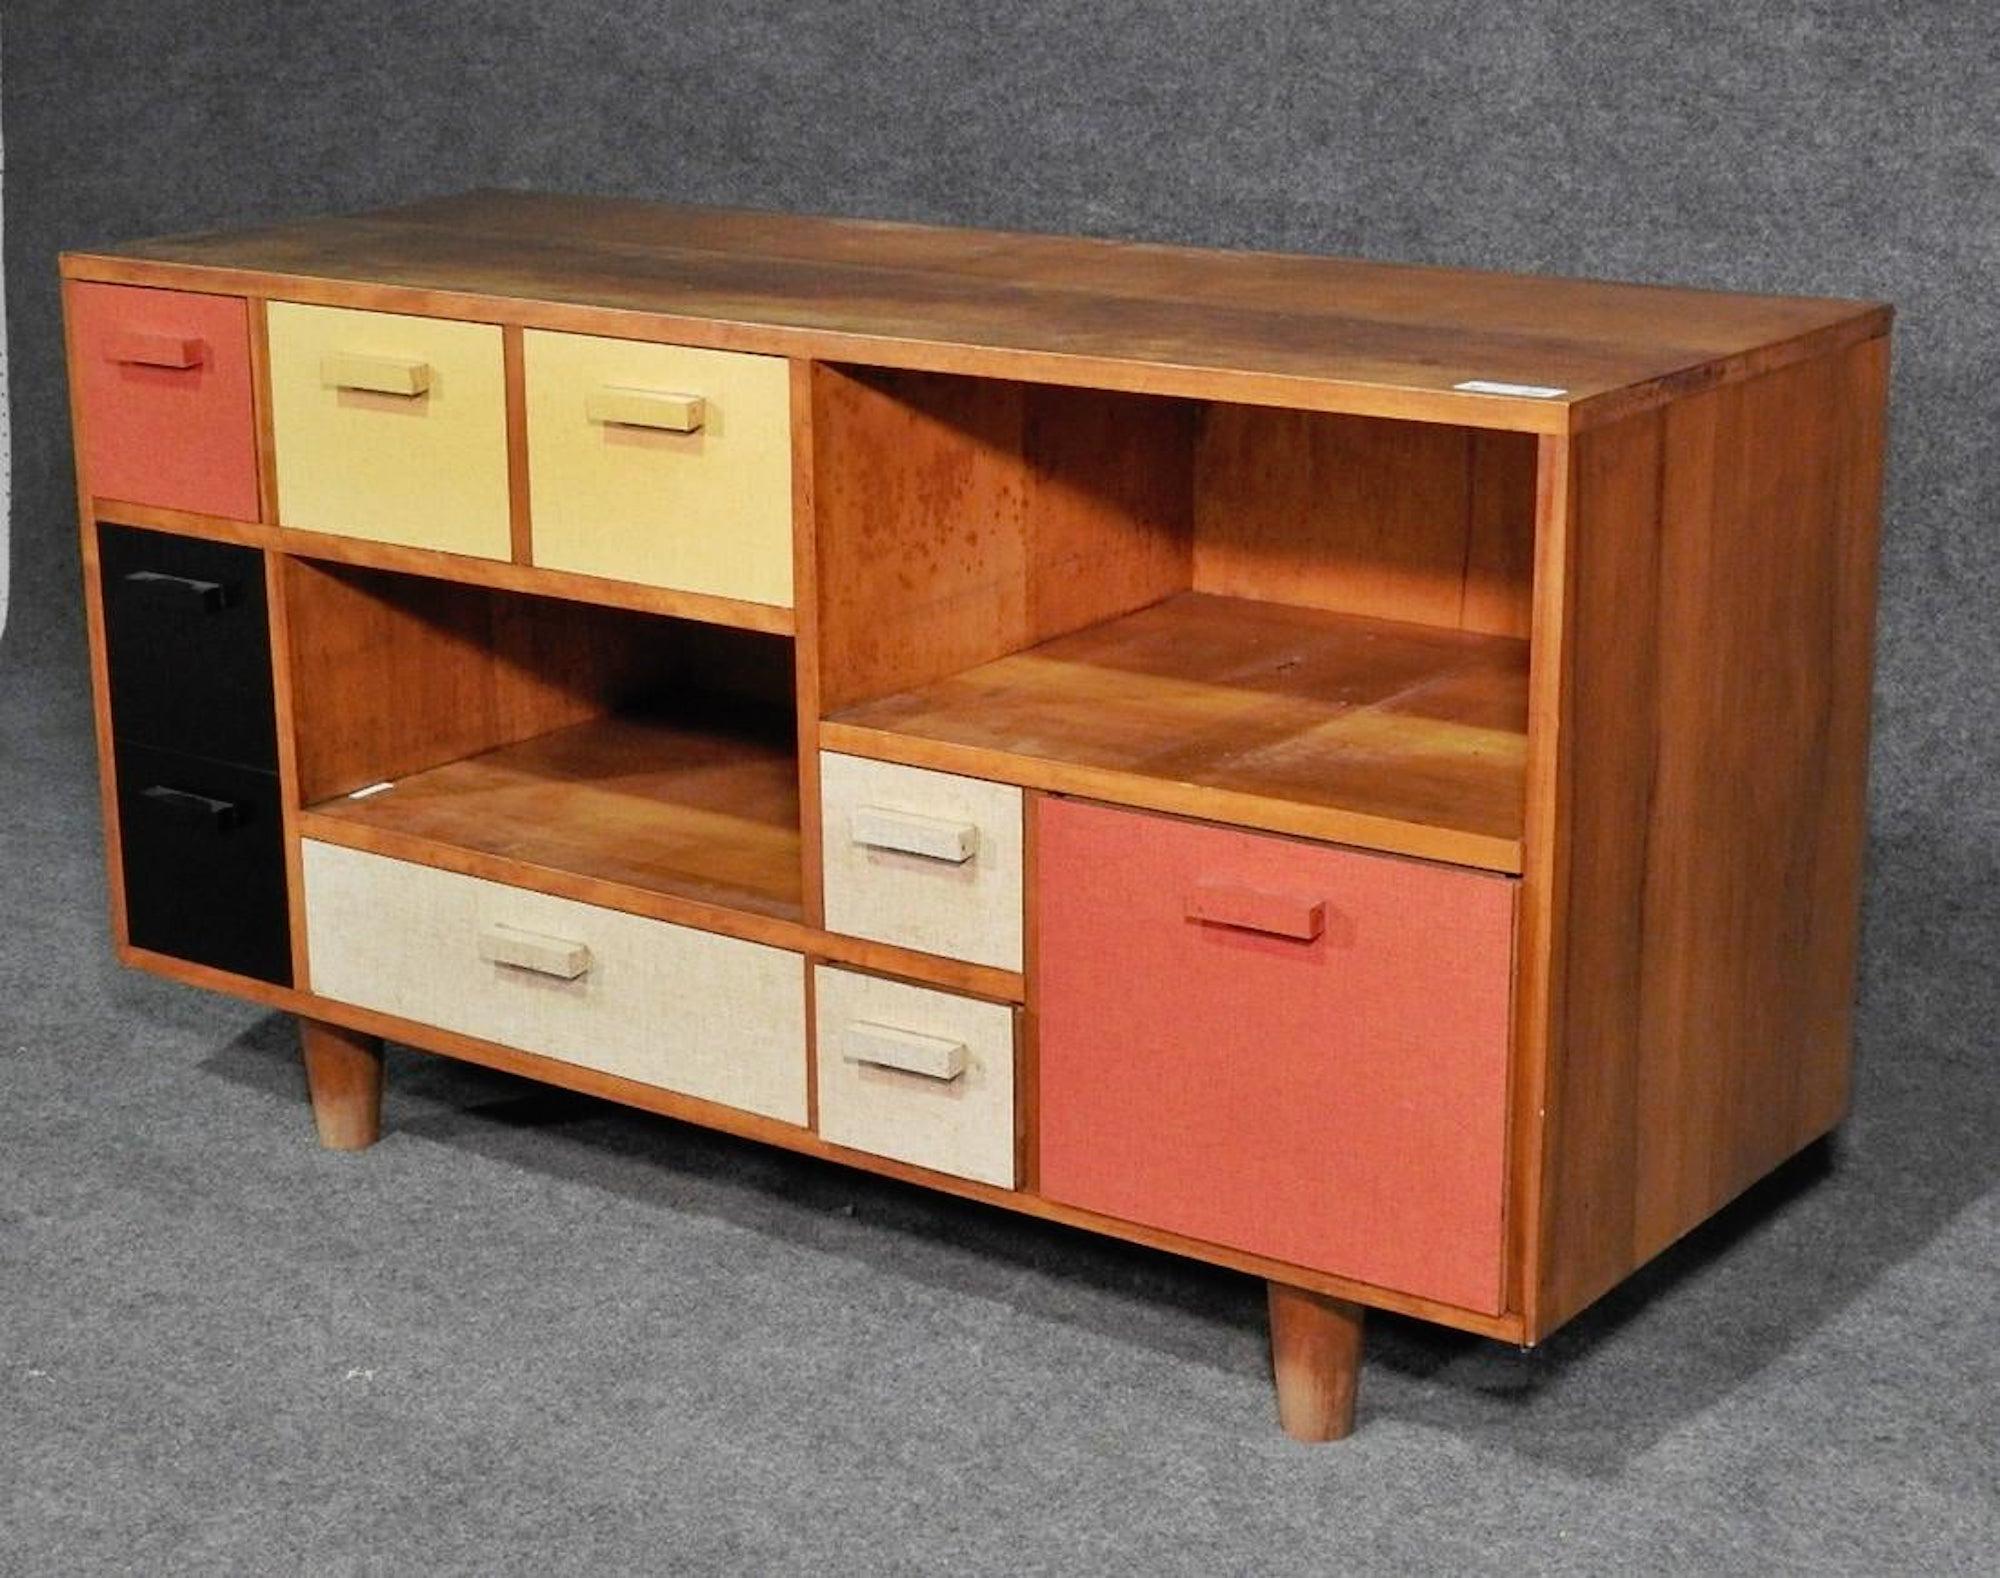 Fun modern credenza with colorful drawers and storage space.
(Please confirm item location - NY or NJ - with dealer).
 